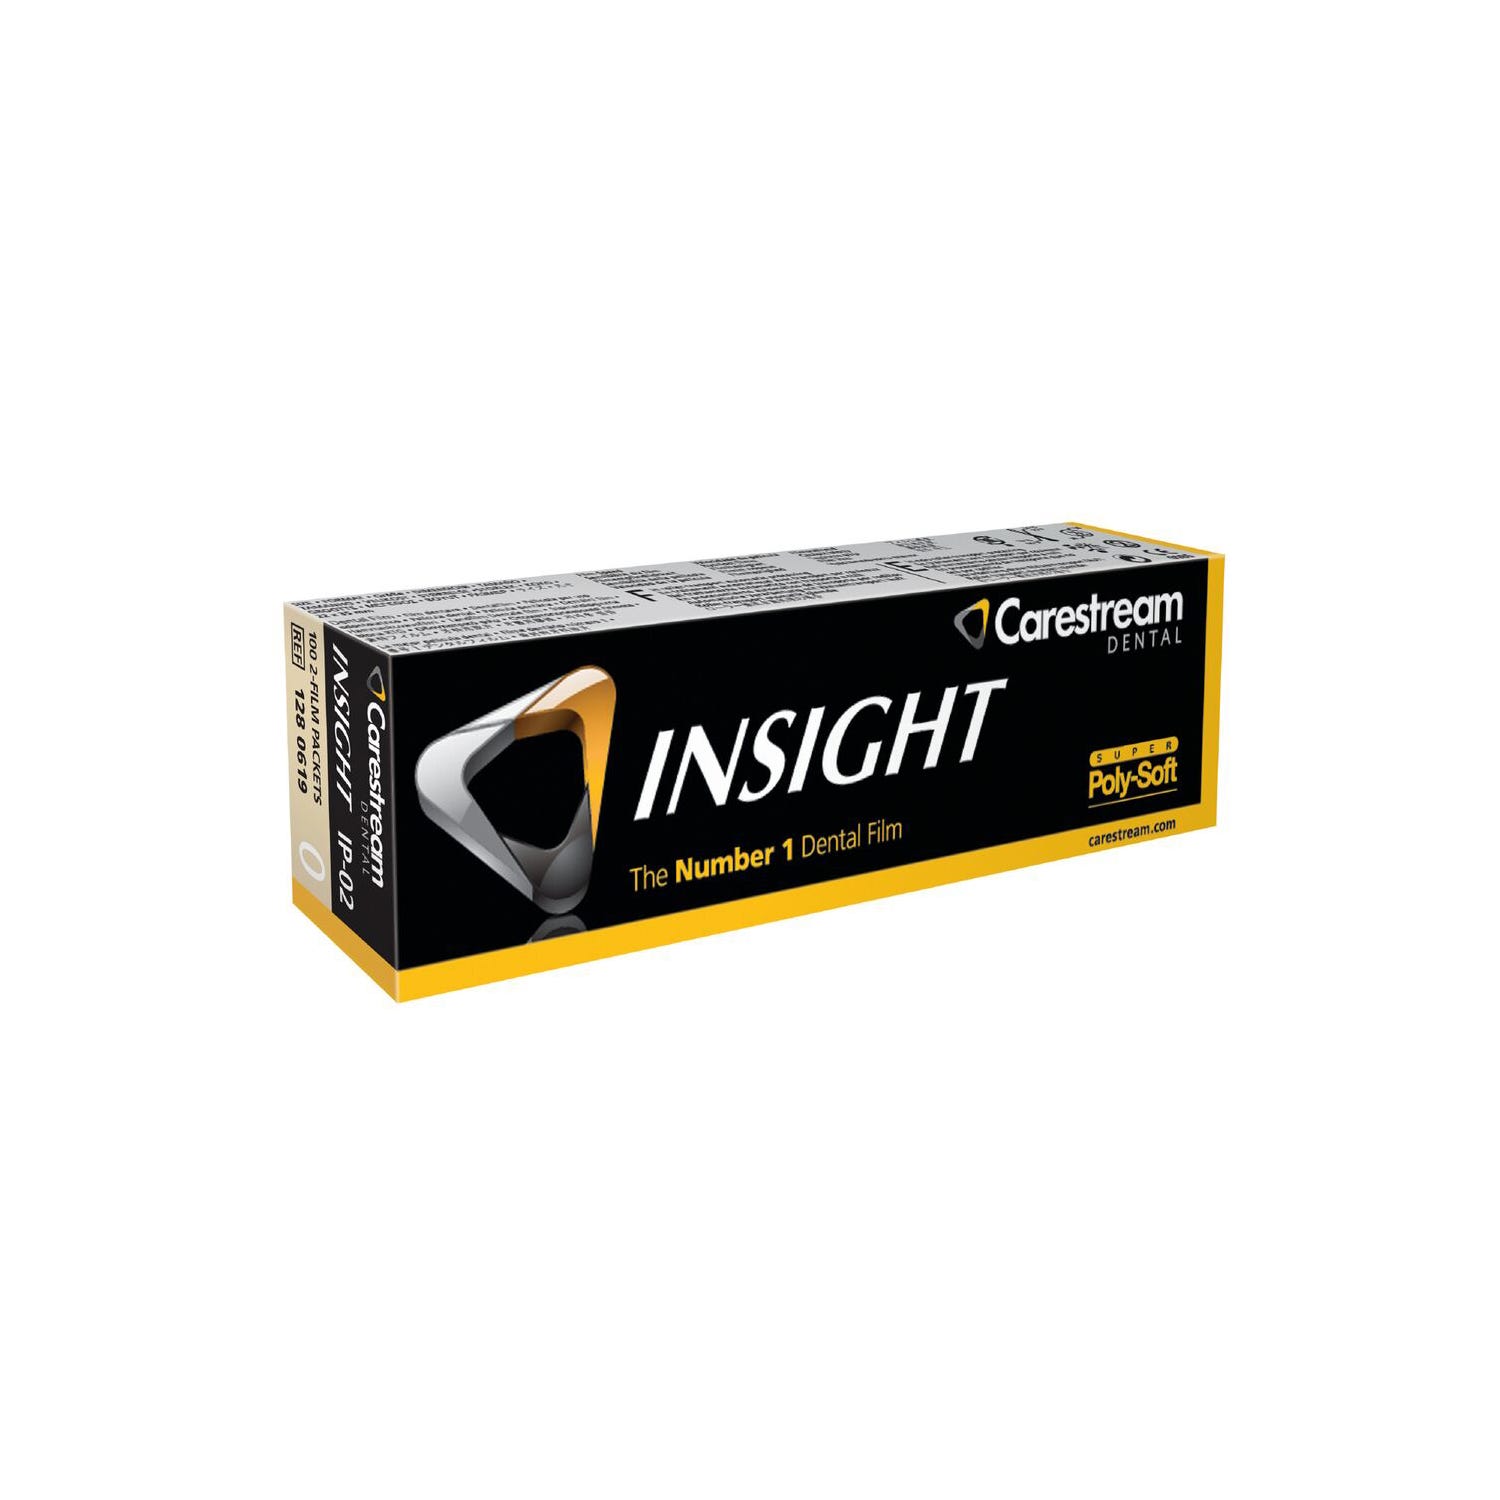 INSIGHT Dental Film, Size 0, IP-02, Super Poly-Soft Packets (Double Film) - 100/Box